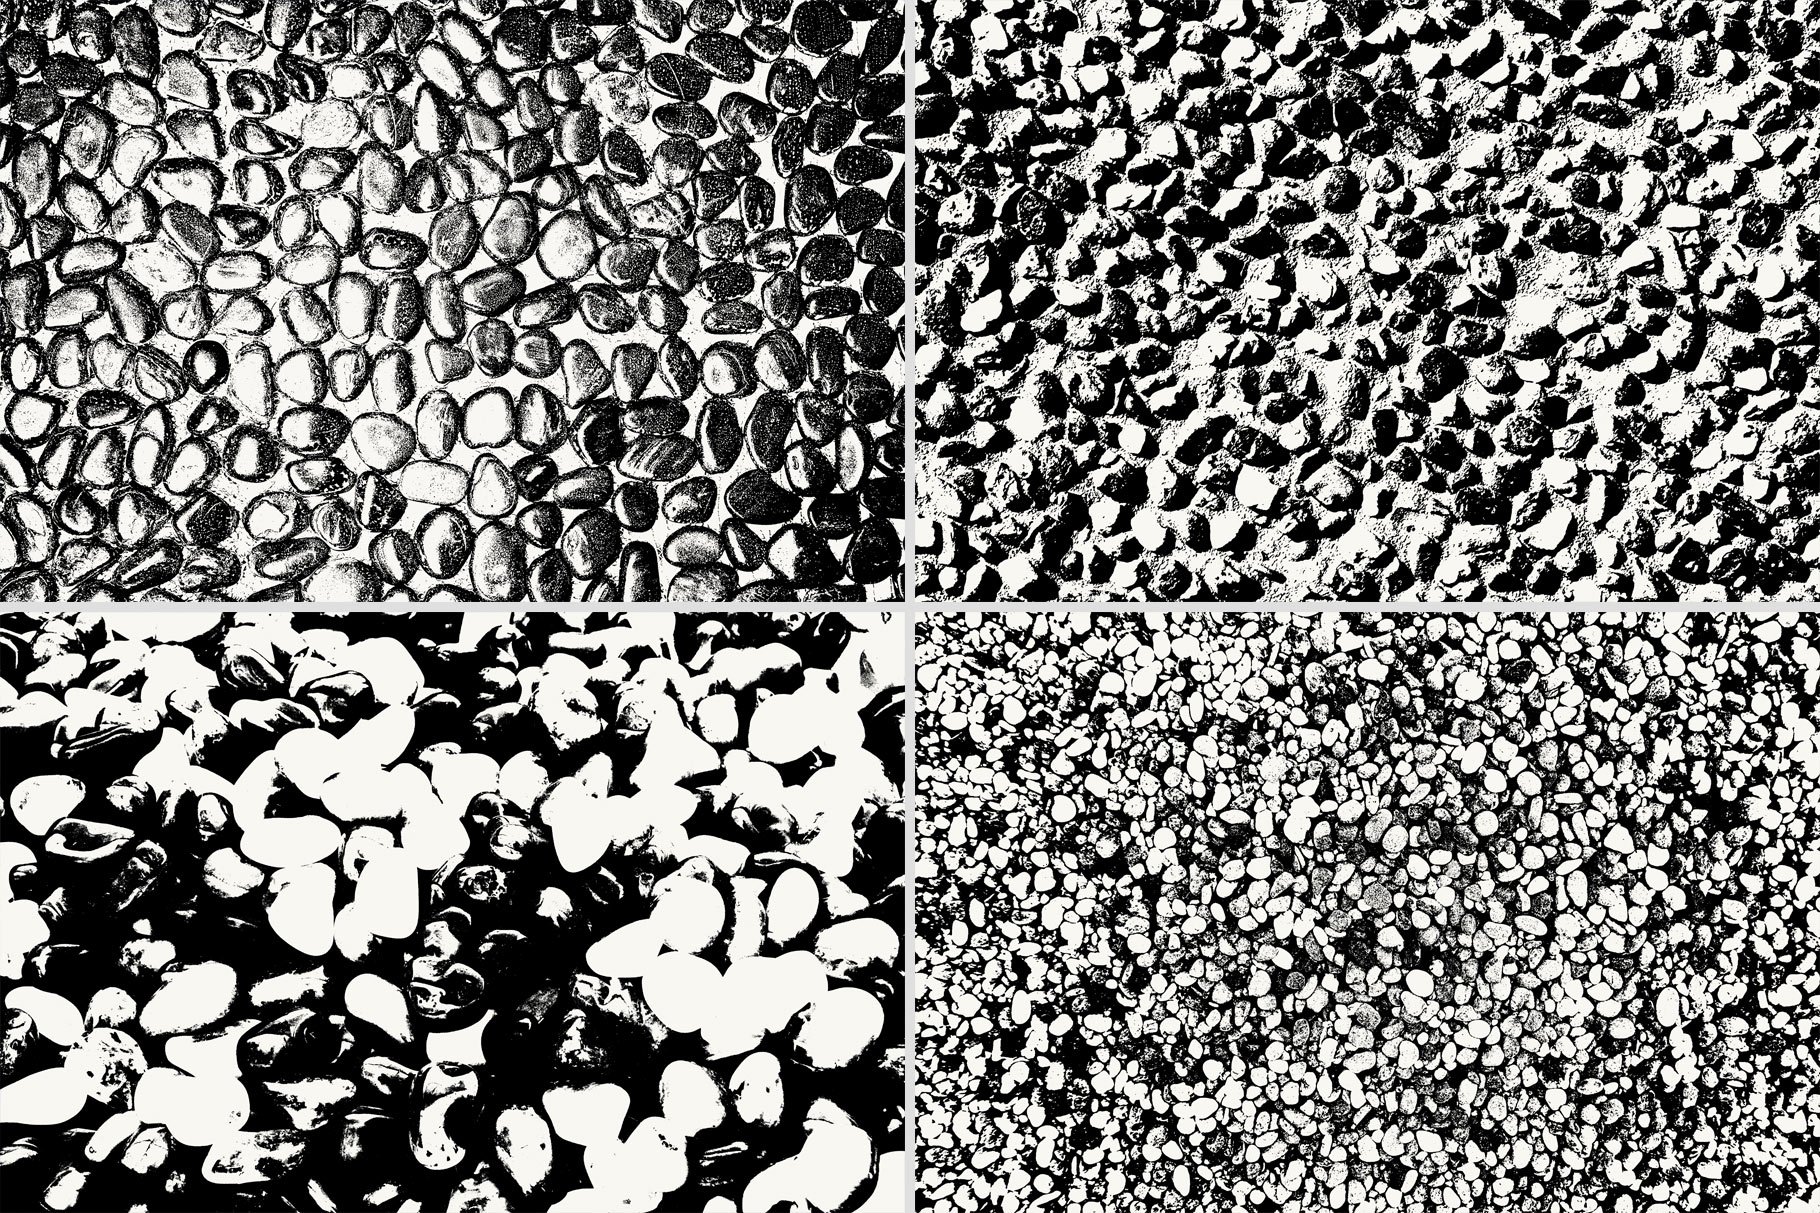 Pebble Textures preview image.